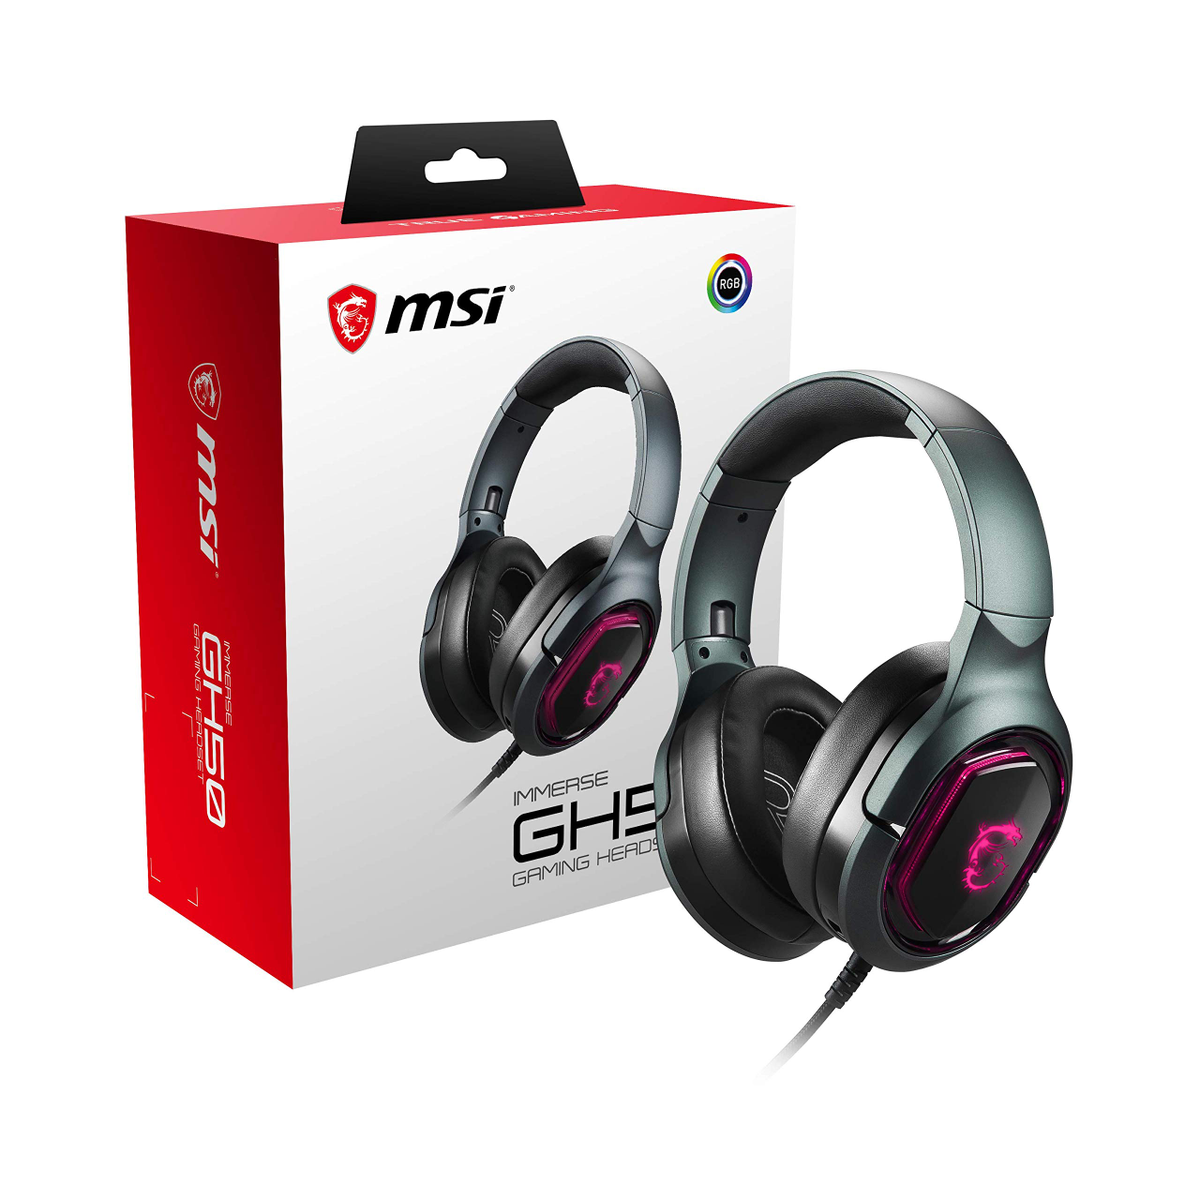 MSI S37-0400020-SV1 HEADSET, GAMING Gaming GH50 Headset Schwarz IMMERSE Over-ear